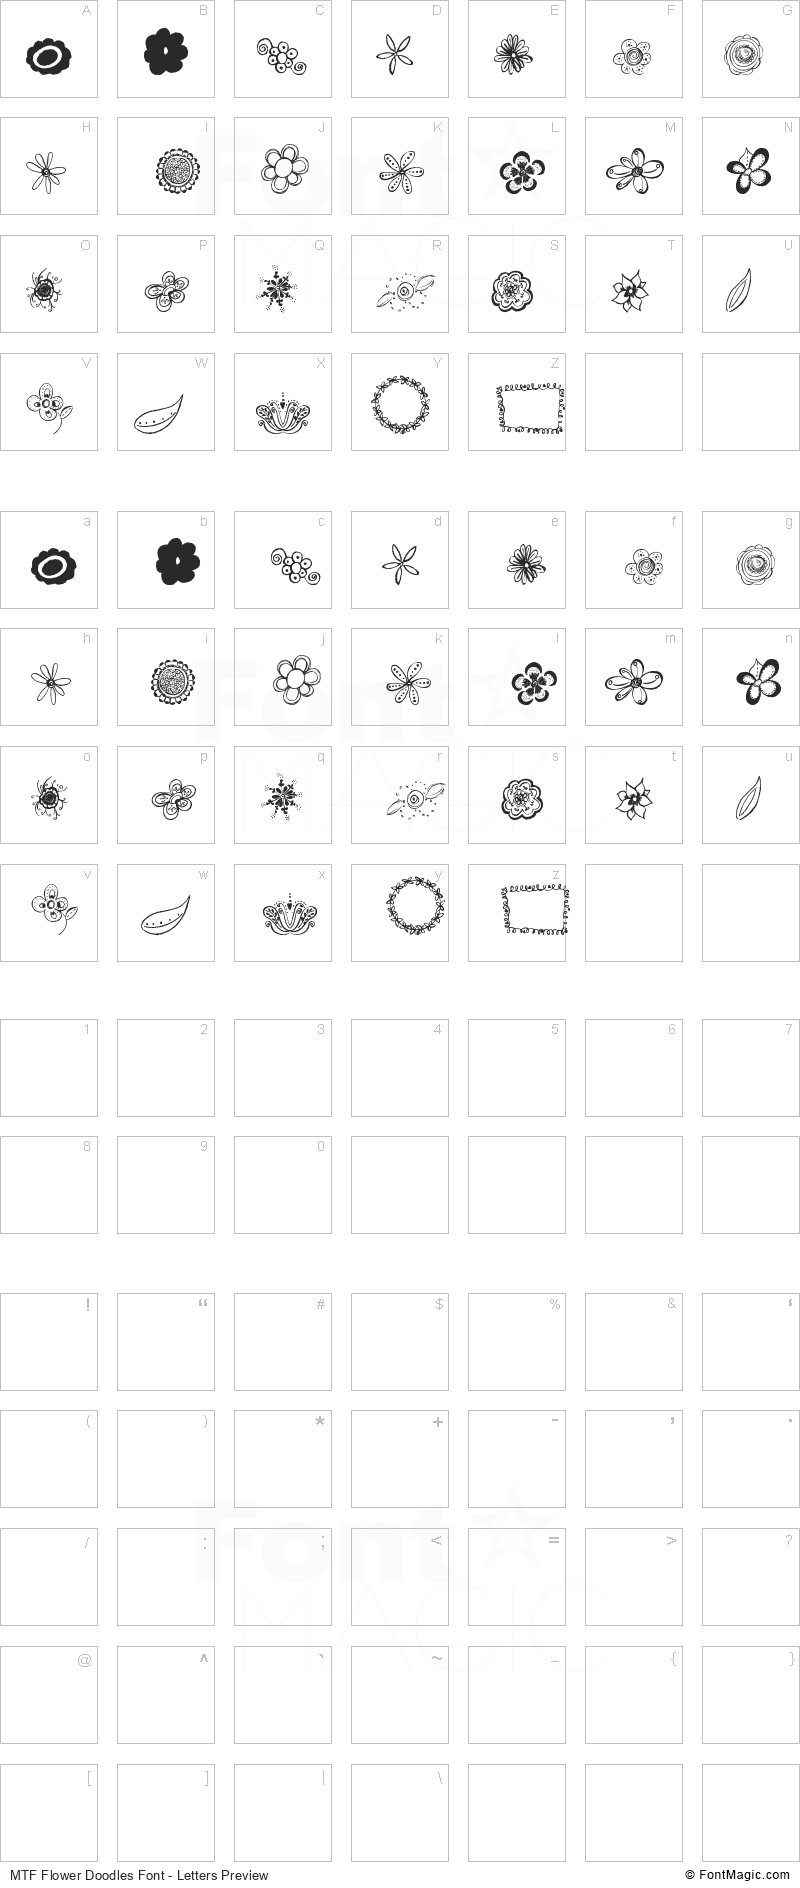 MTF Flower Doodles Font - All Latters Preview Chart